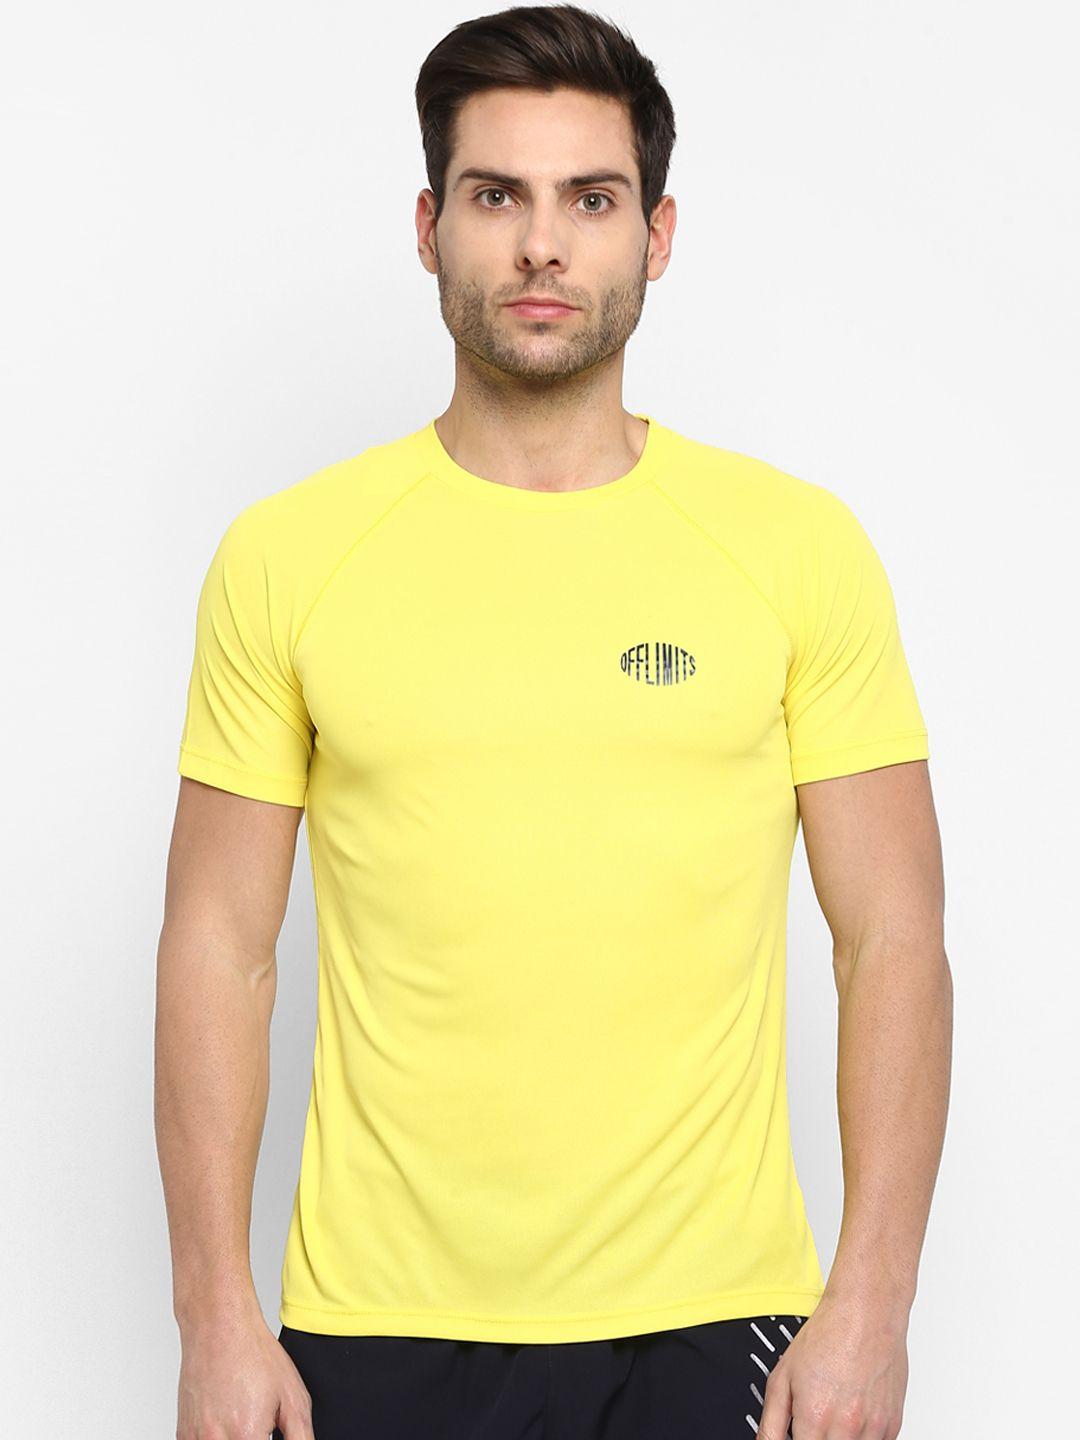 off limits men yellow solid round neck t-shirt